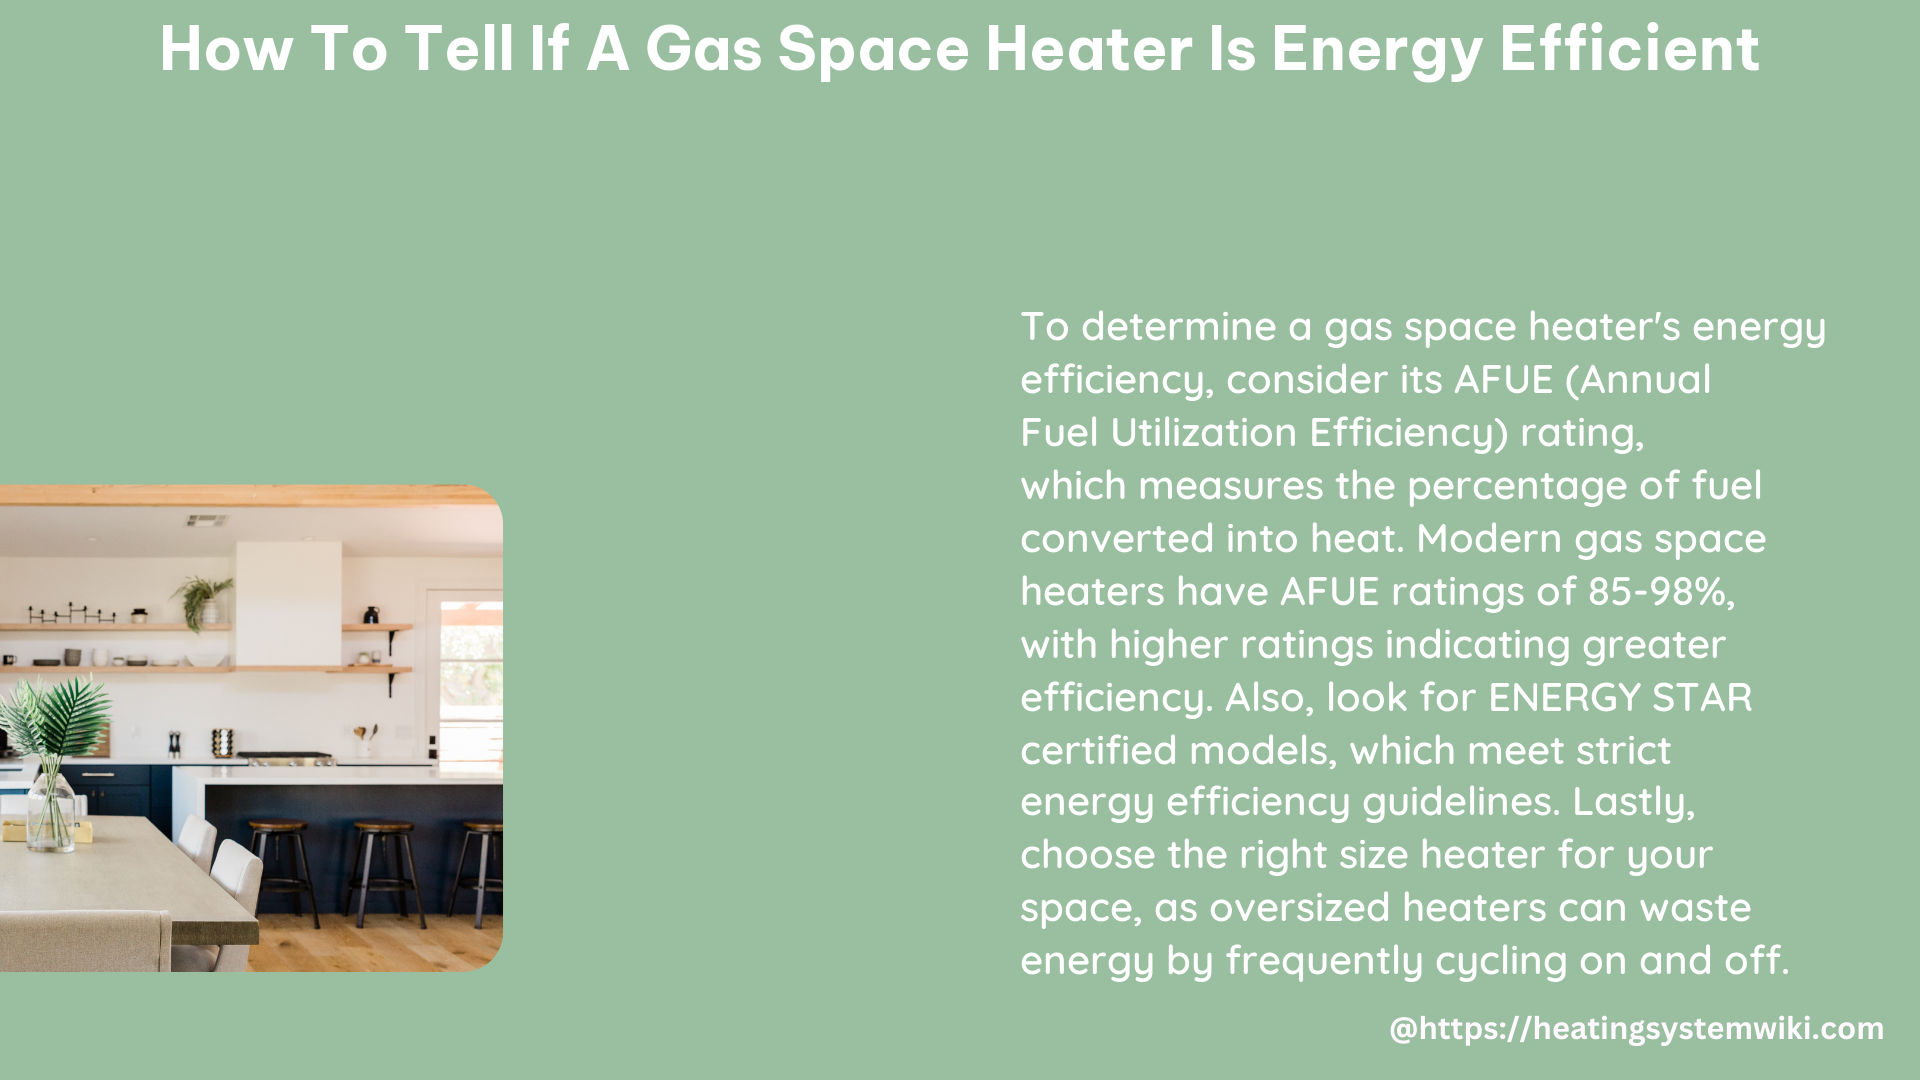 how to tell if a Gas Space Heater is energy efficient